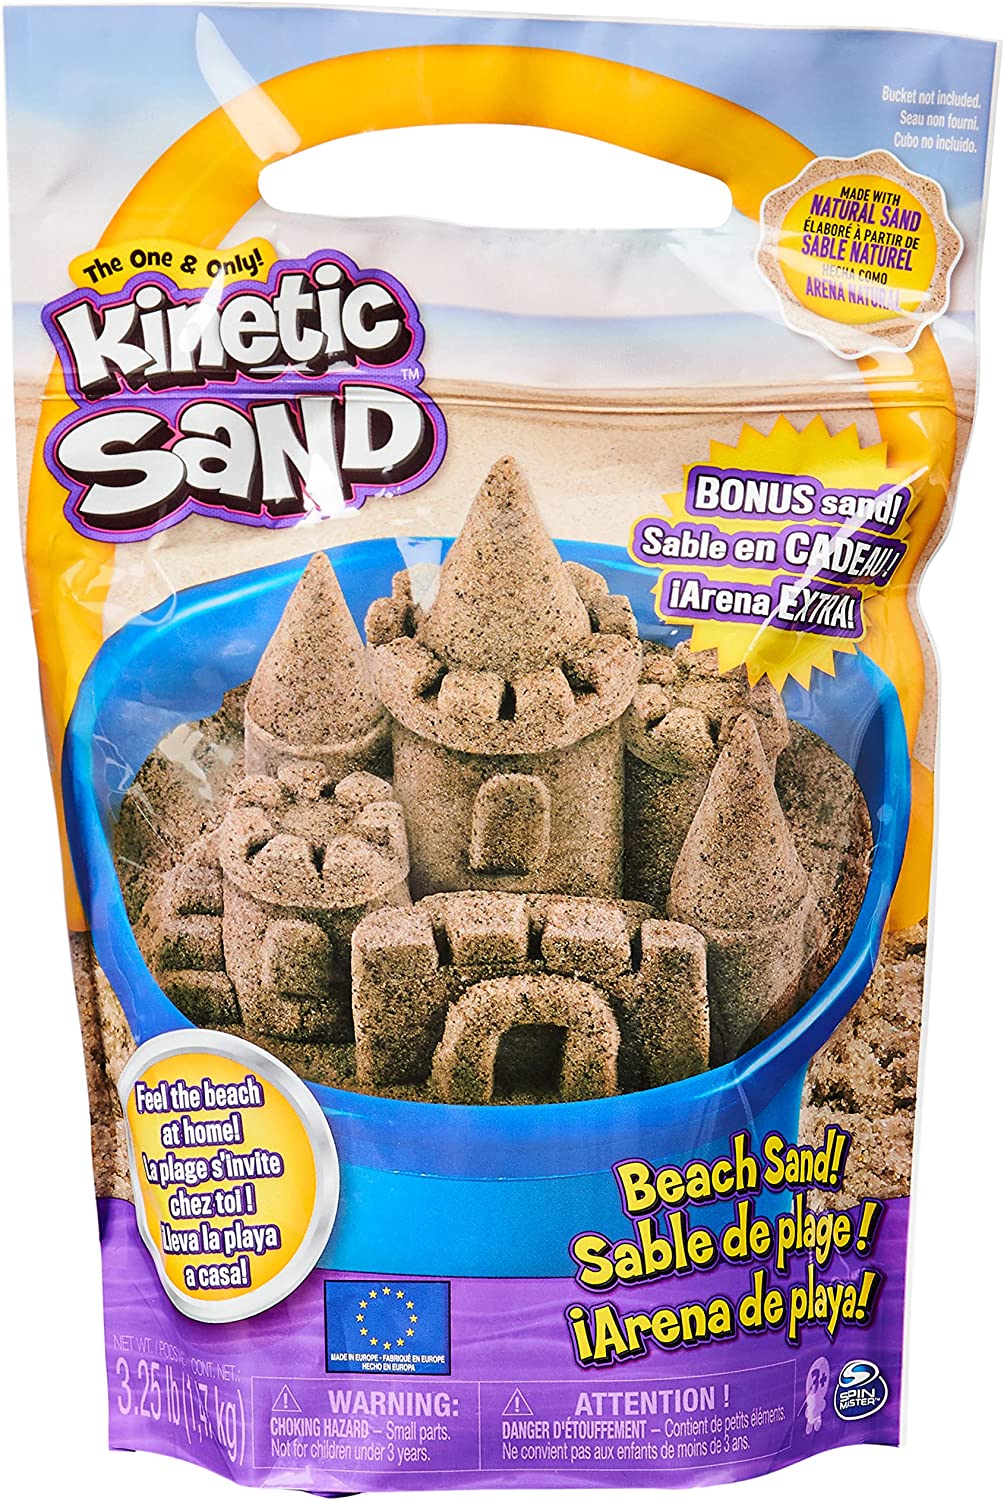 Kinetic Sand, Deluxe Swirl N' Surprise Playset, 2.5lbs of Play Sand (Red,  Blue